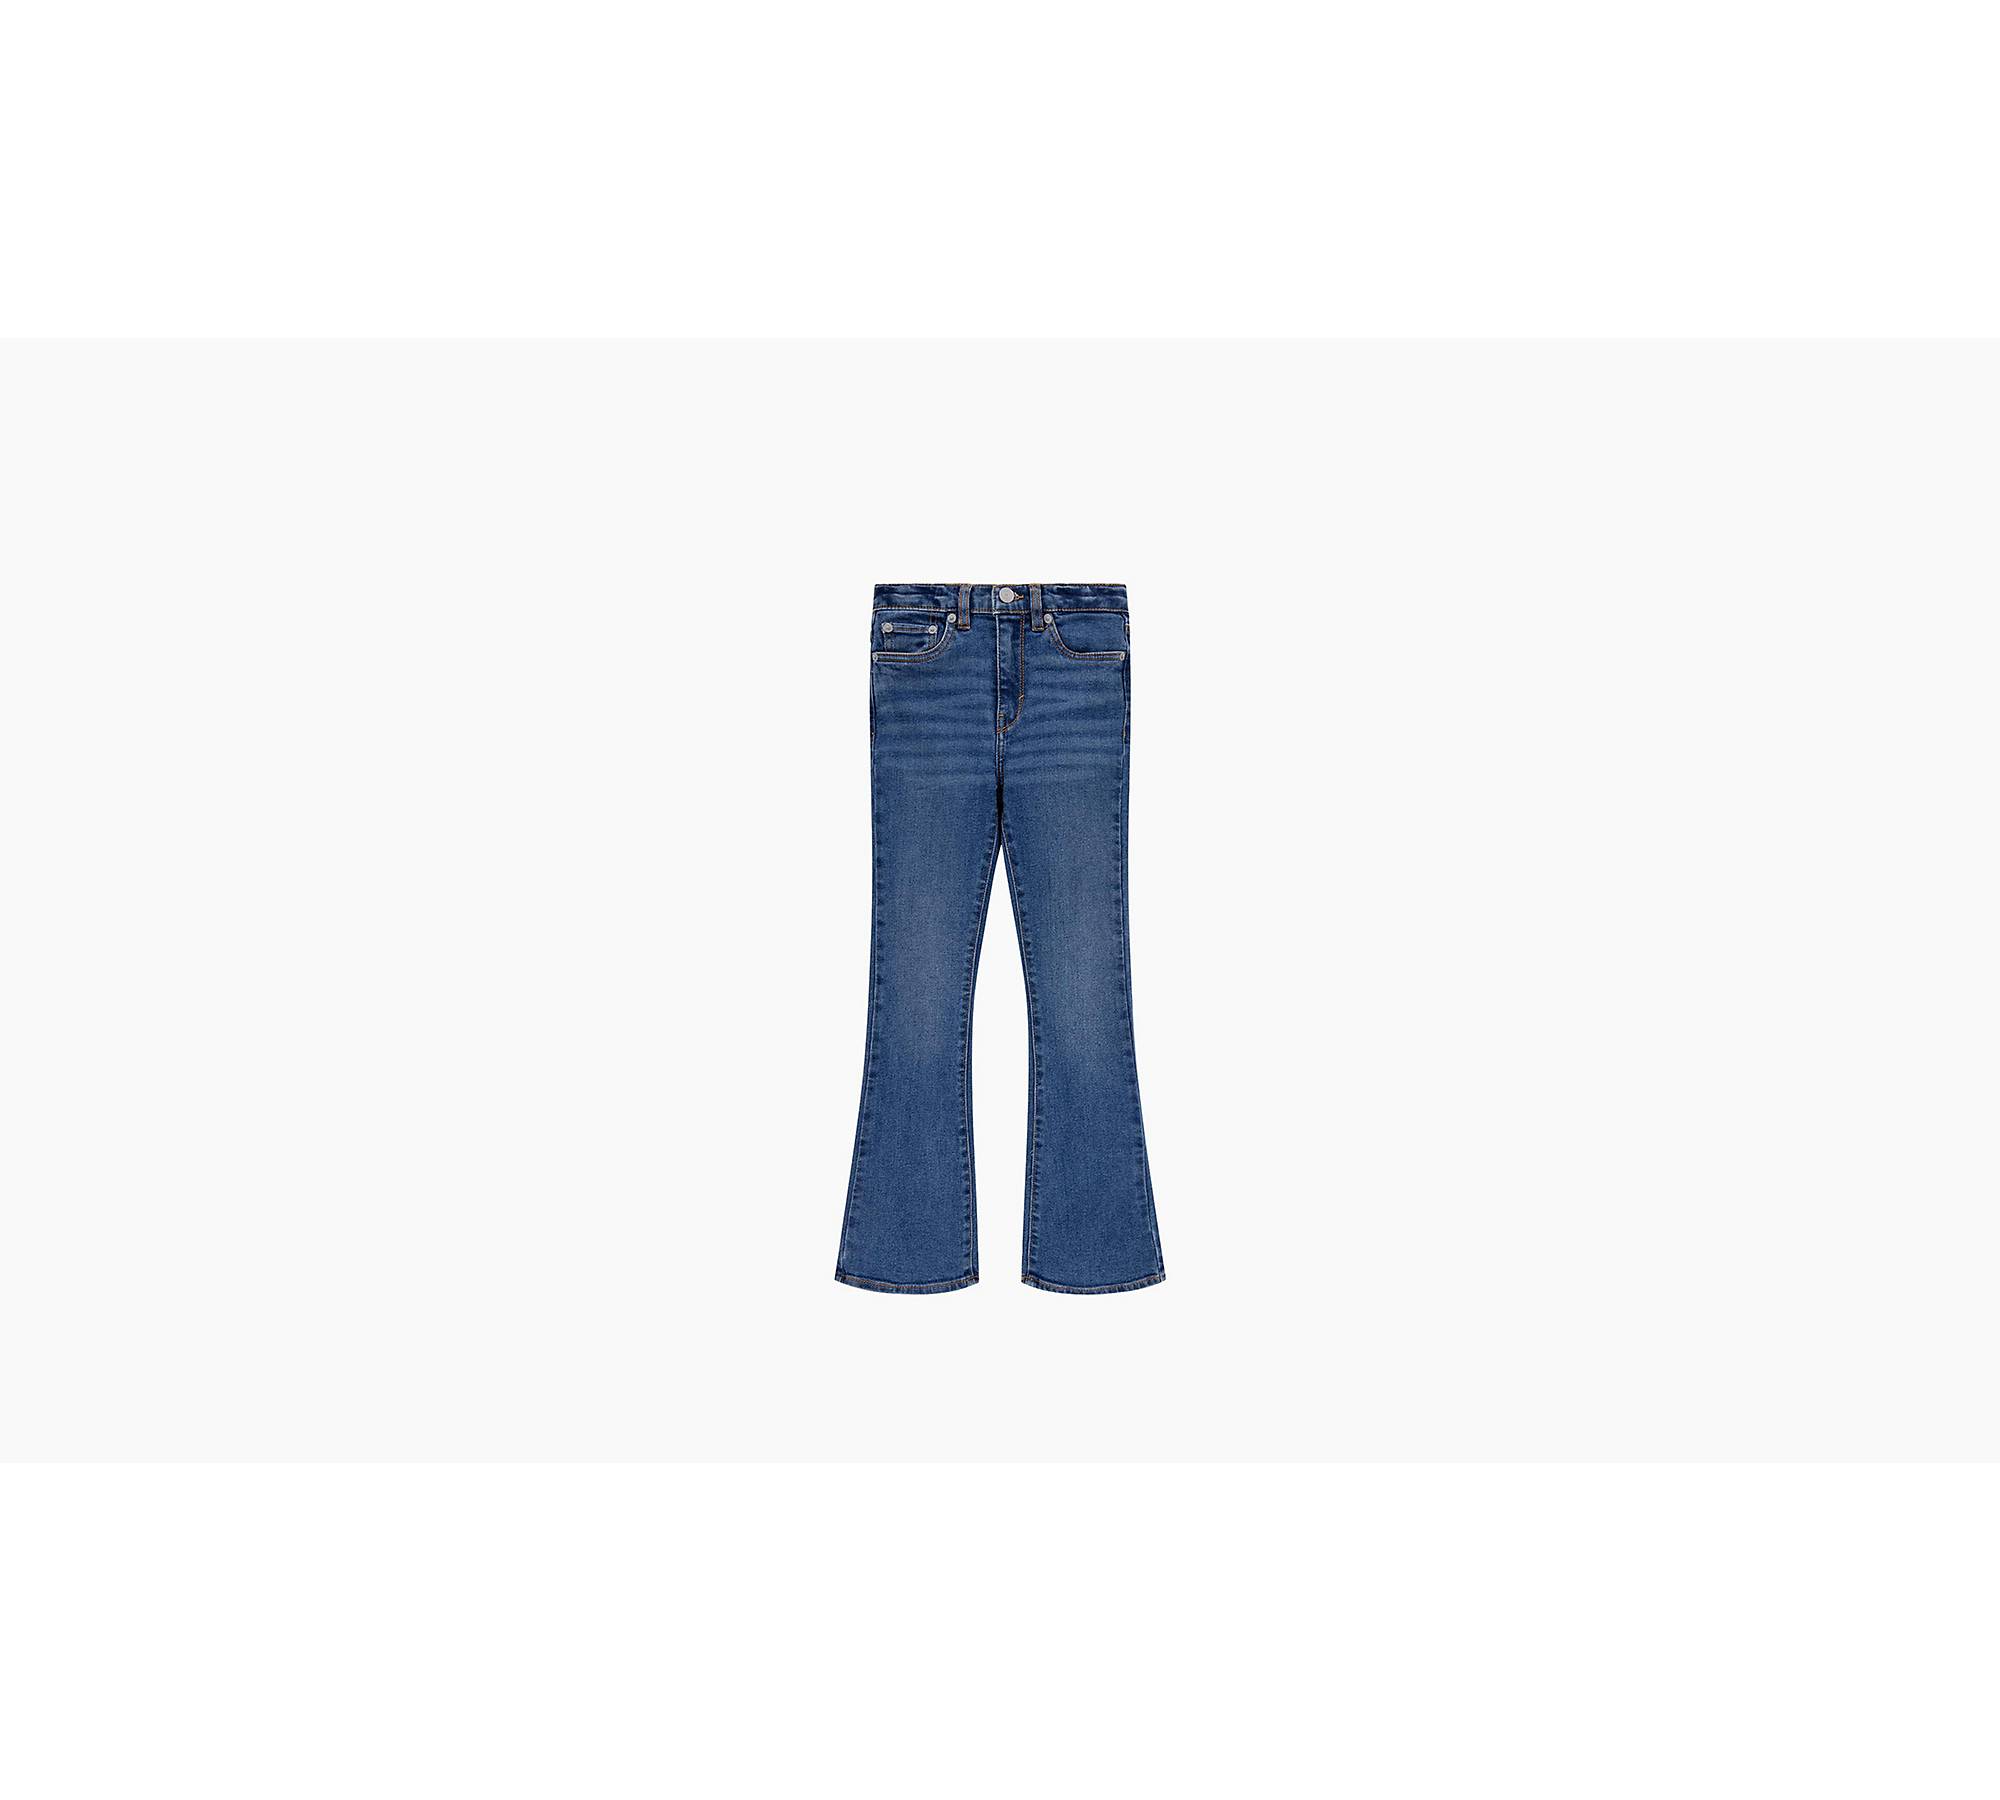 Levi's Youth Girl's 726 High Rise Flare Leg Jeans